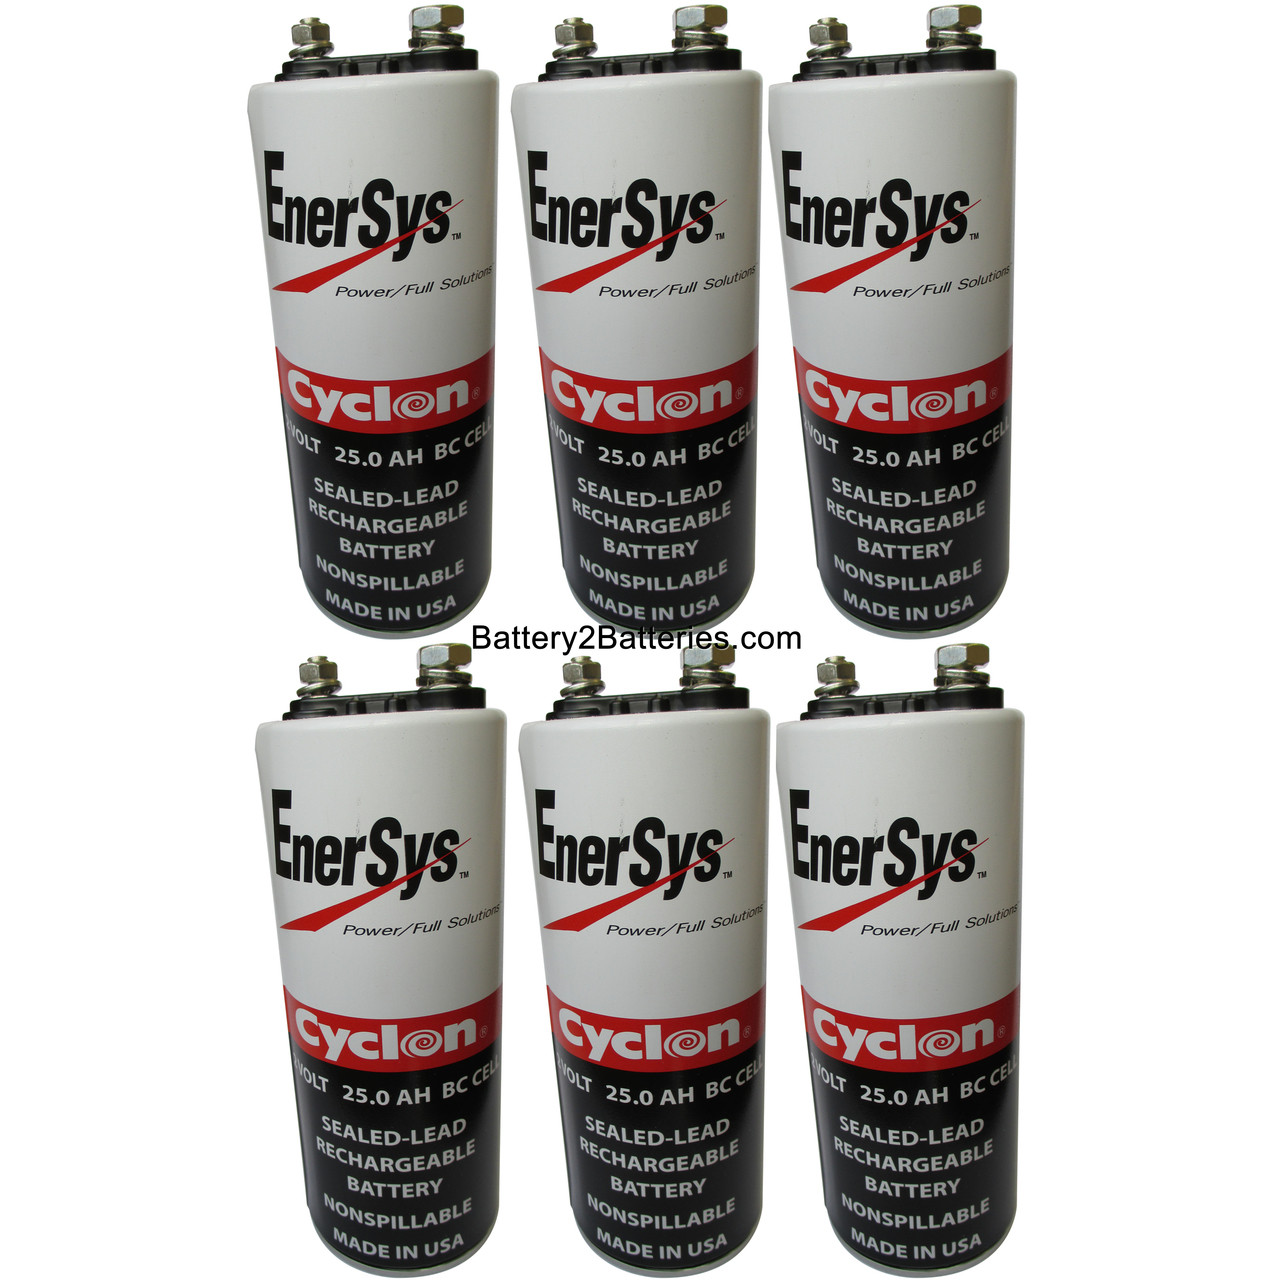 0820-0004 Battery 2 Volt 25.0 AH BC Cell by Enersys Cyclon (Case of 6)